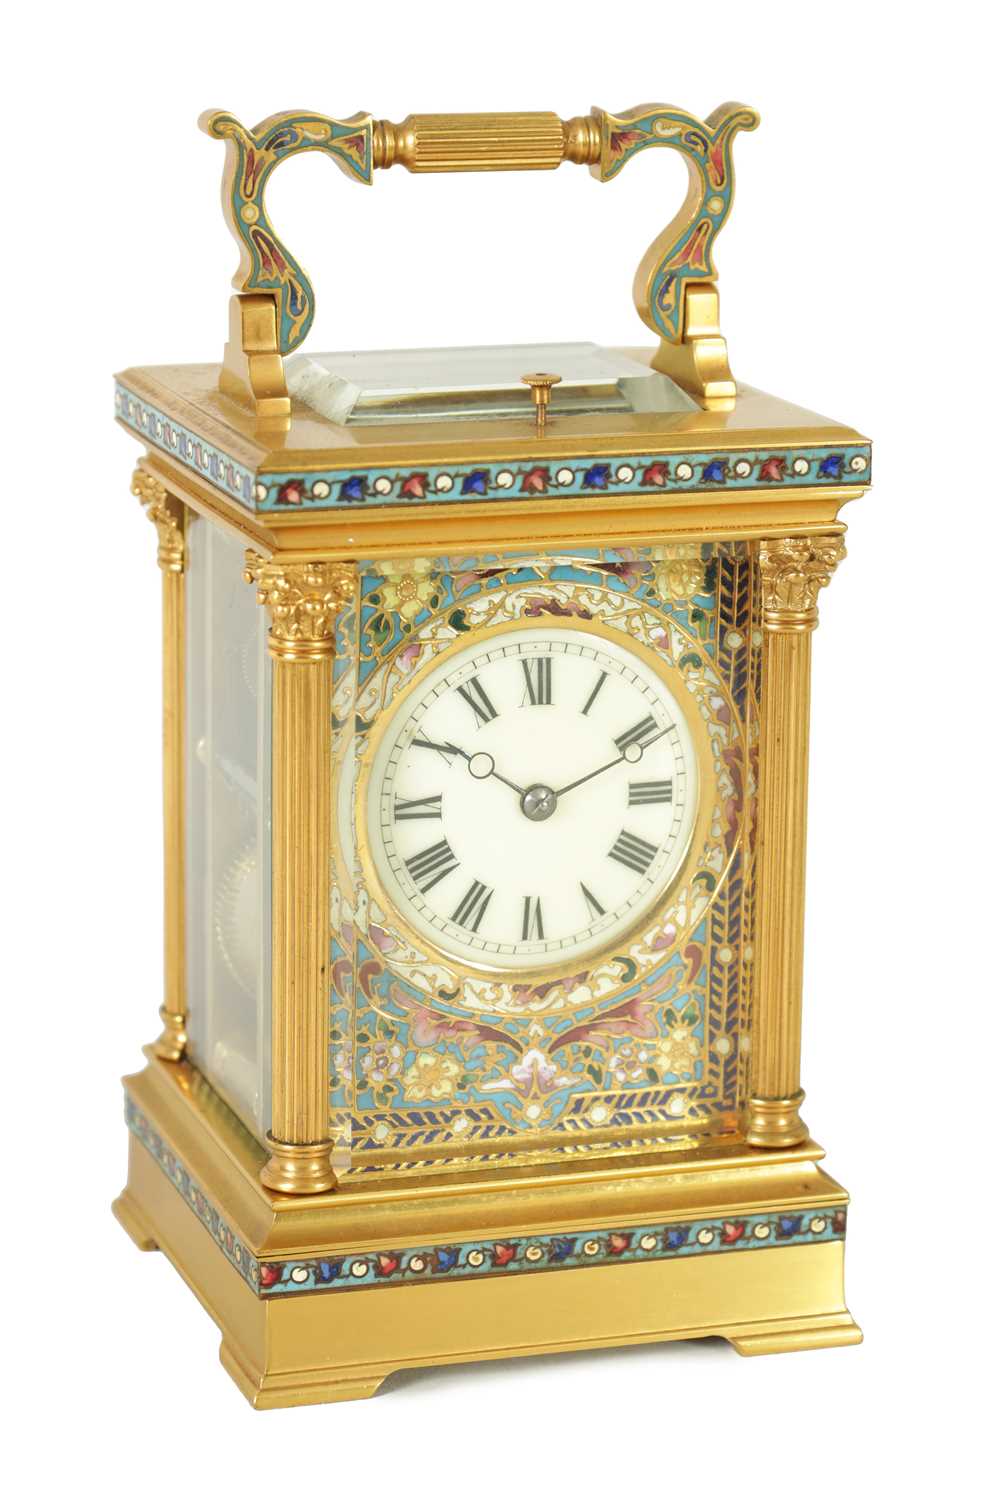 A LATE 19TH CENTURY FRENCH GILT BRASS AND CHAMPLEVE ENAMEL REPEATING CARRIAGE CLOCK